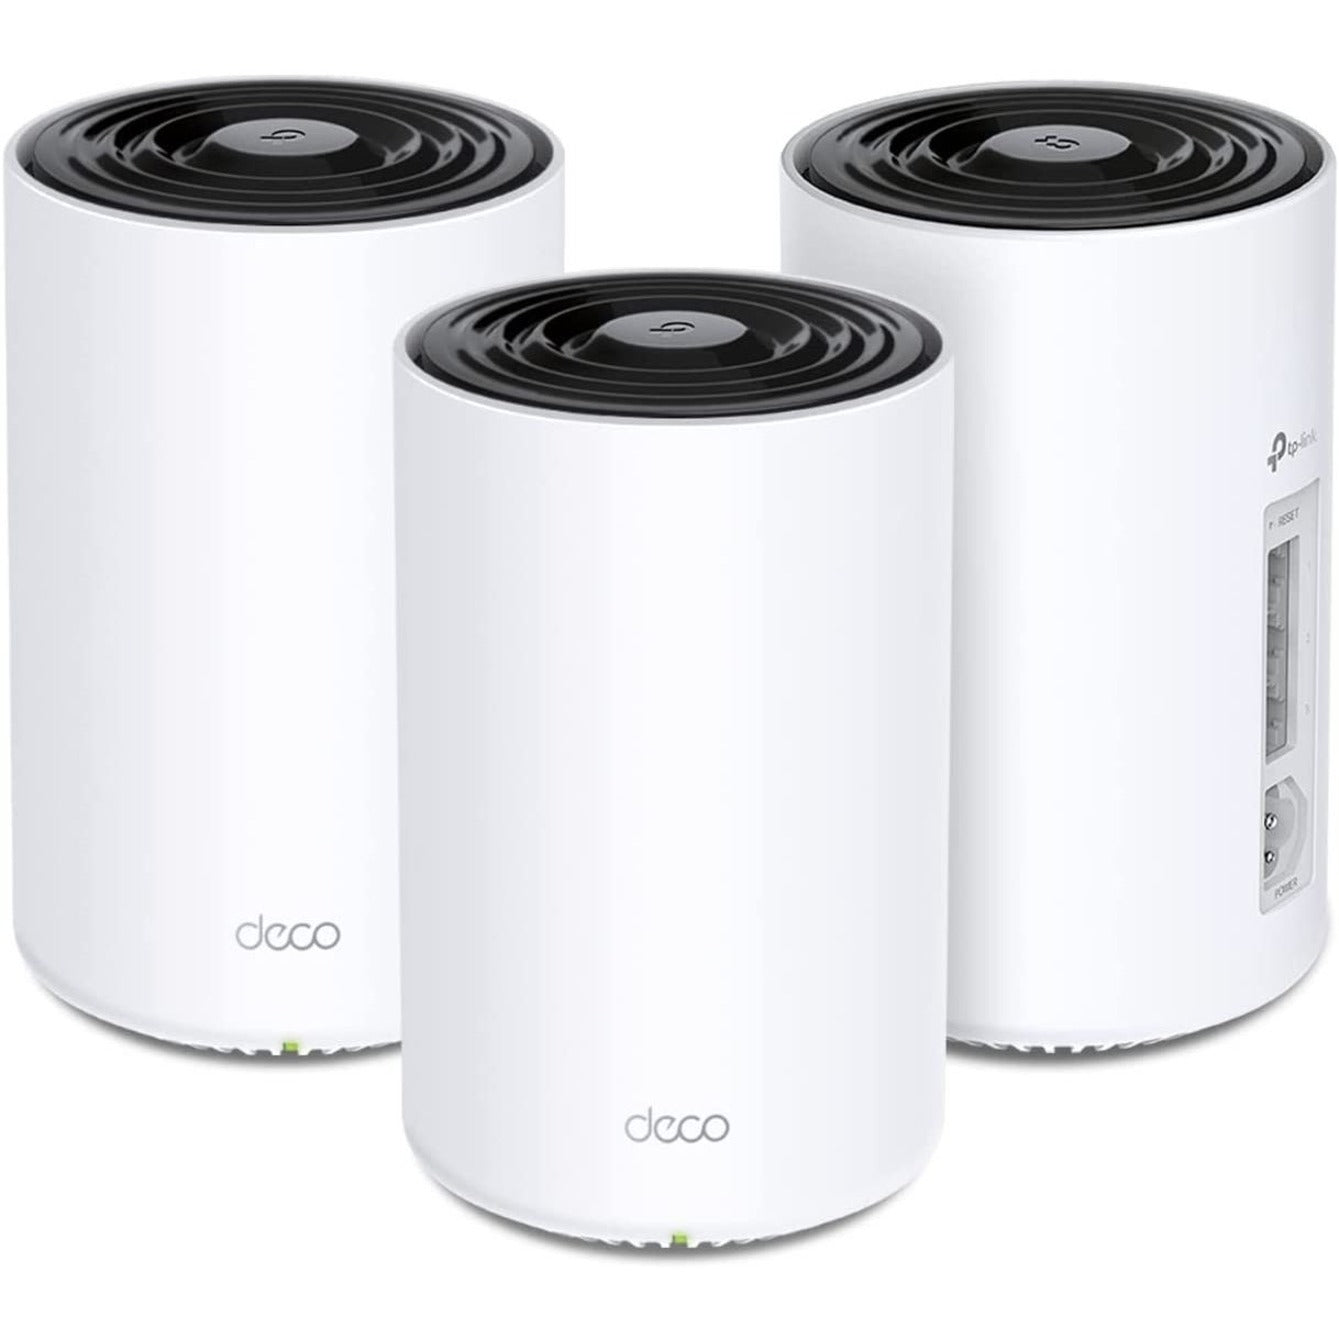 TP-Link DECO PX50(3-PACK) AX3000 + G1500 Whole Home Powerline Mesh WiFi 6 System, Dual Band, Gigabit Ethernet, Alexa/Google Assistant Supported